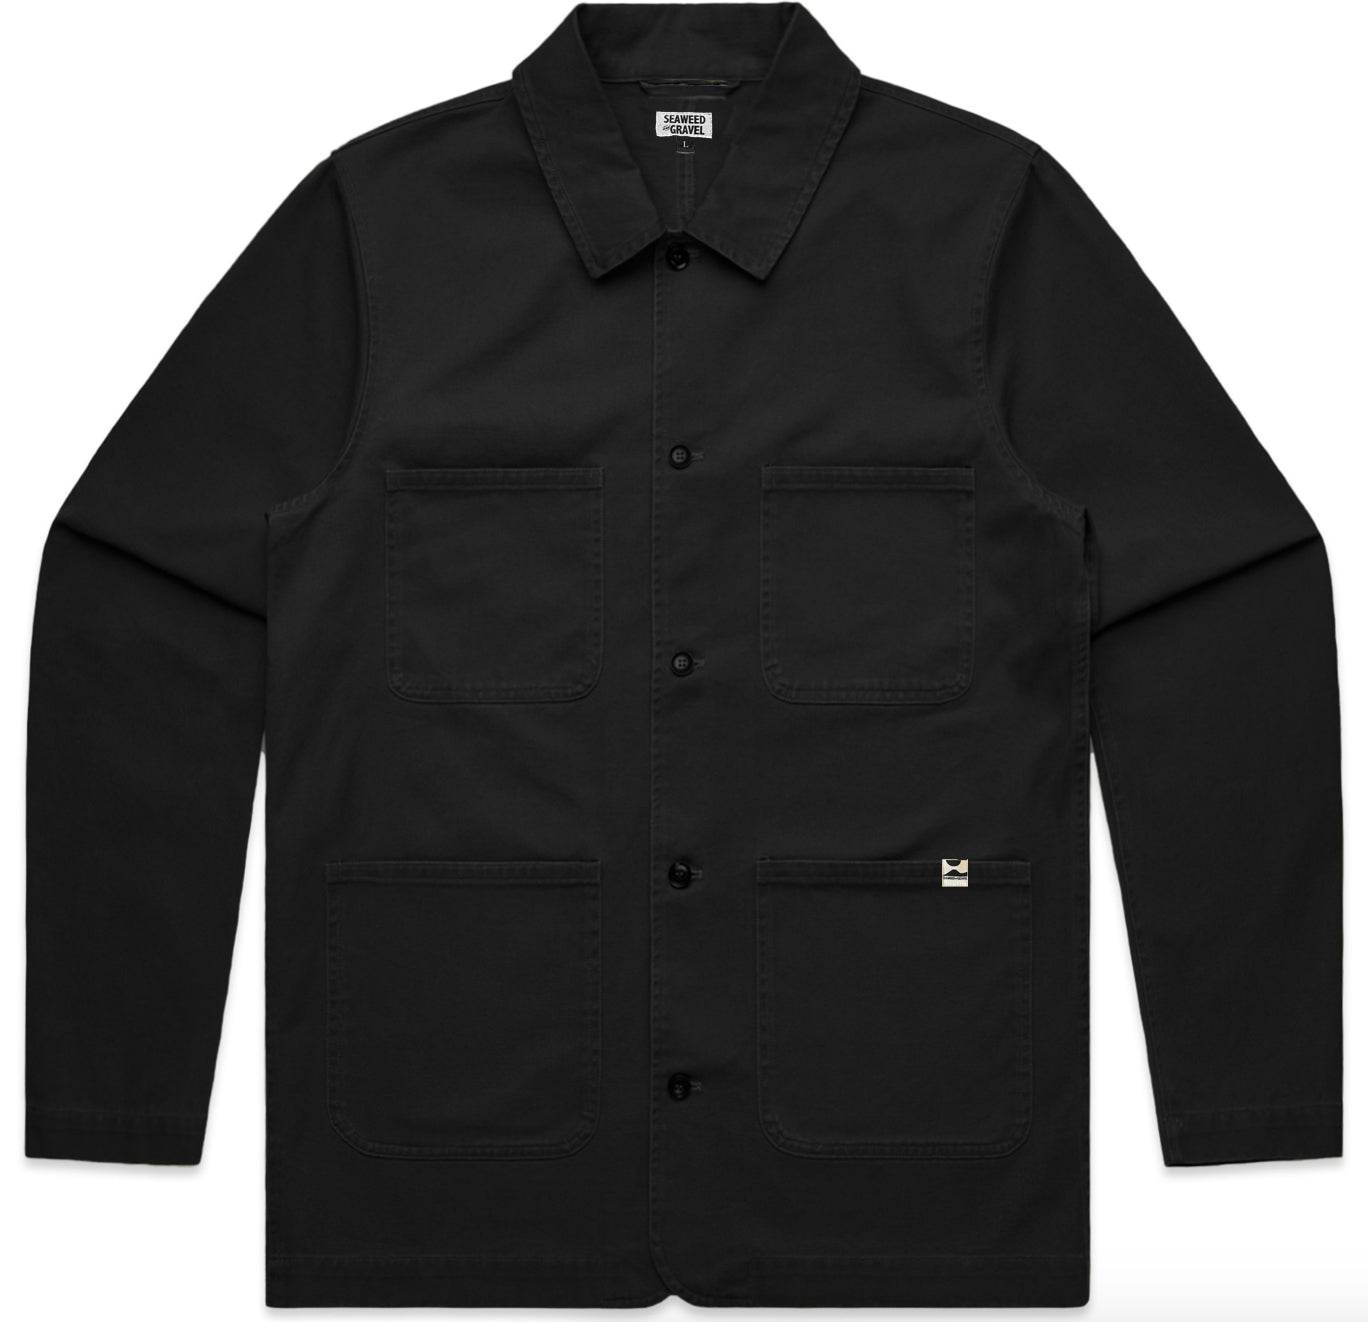 Jacket Chore Coat Twill by S&G Black 30% off Price